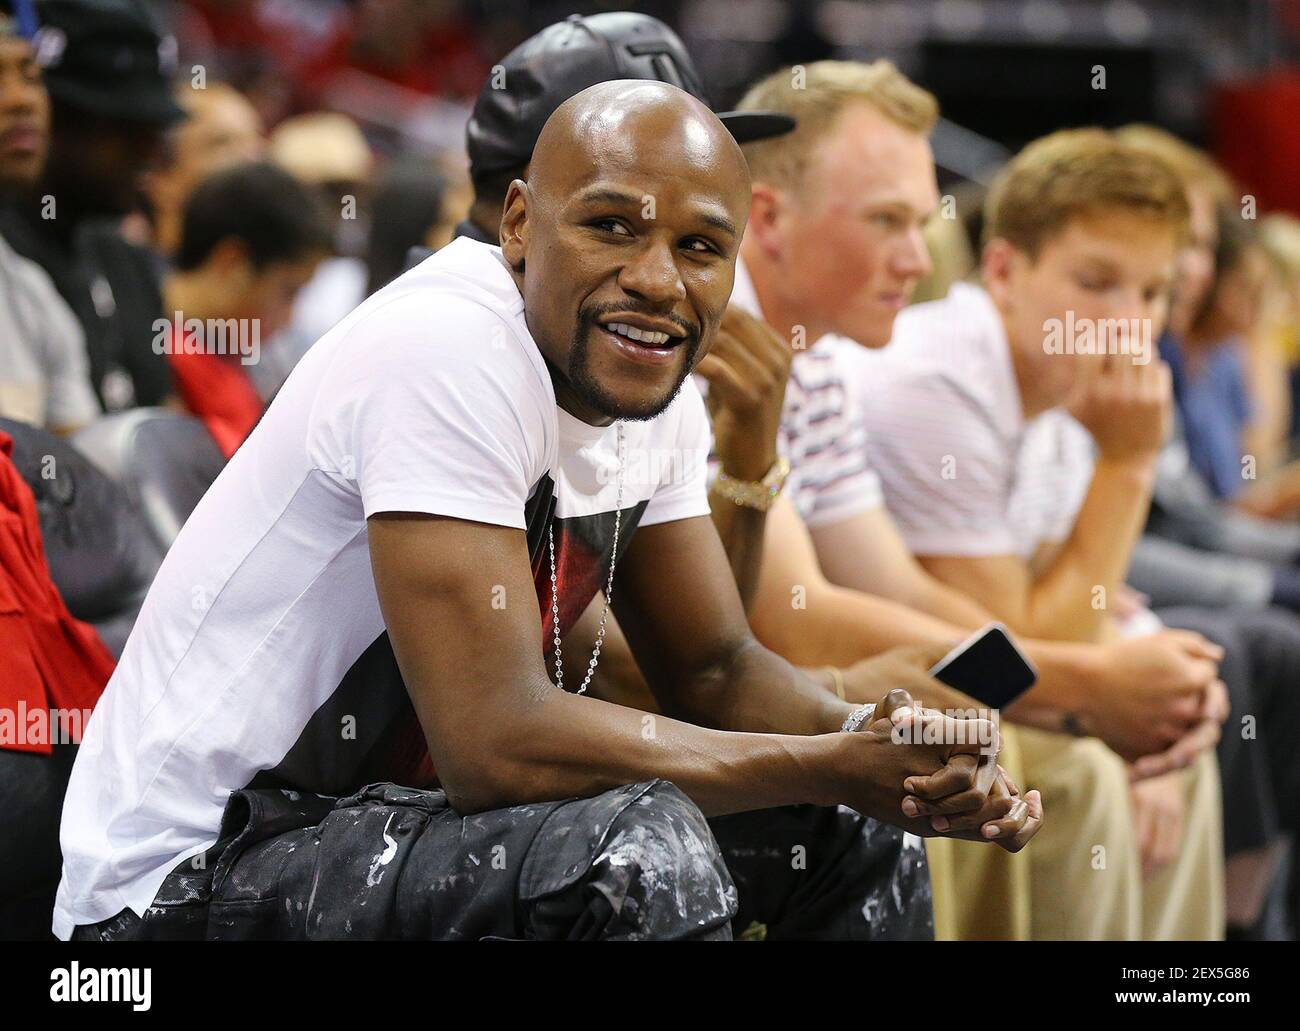 Boxer Floyd Mayweather Jr. has a front-row seat as the Atlanta Hawks play  host to the Cleveland Cavaliers in Game 1 of the Eastern Conference finals  at Philips Arena in Atlanta on